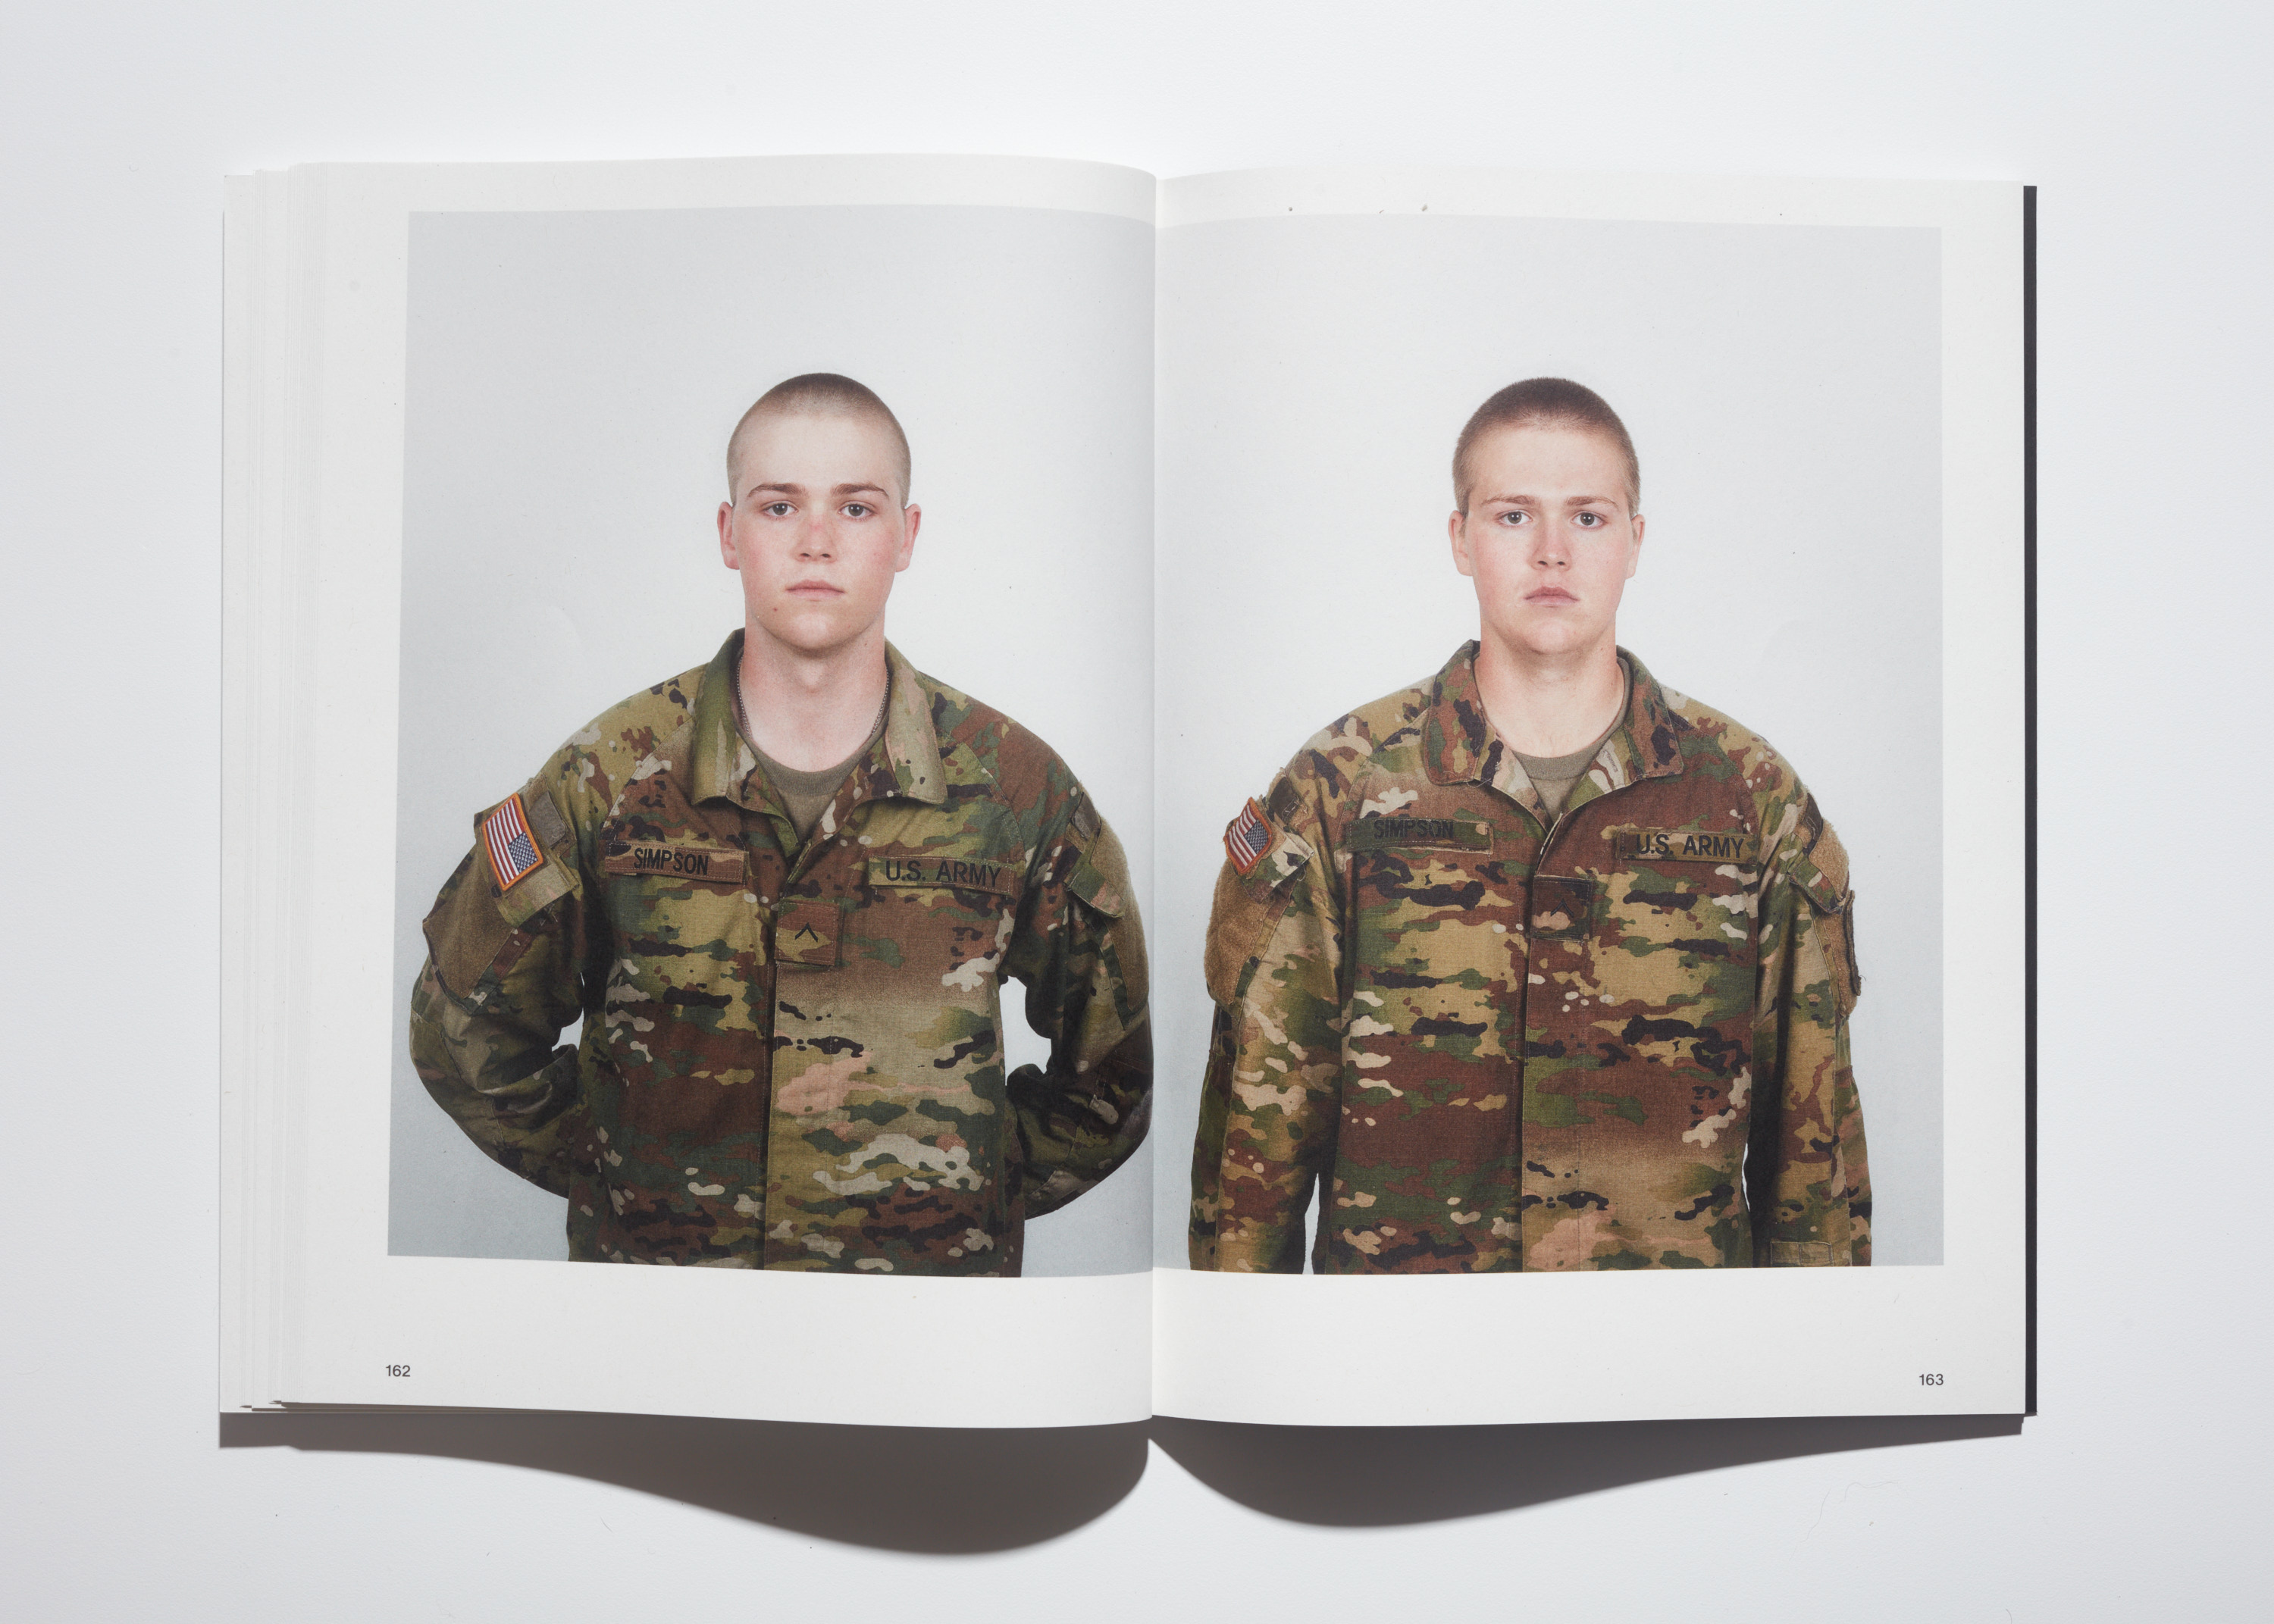 US army recruit Simpson before and after training, photographed by Jason Koxvold